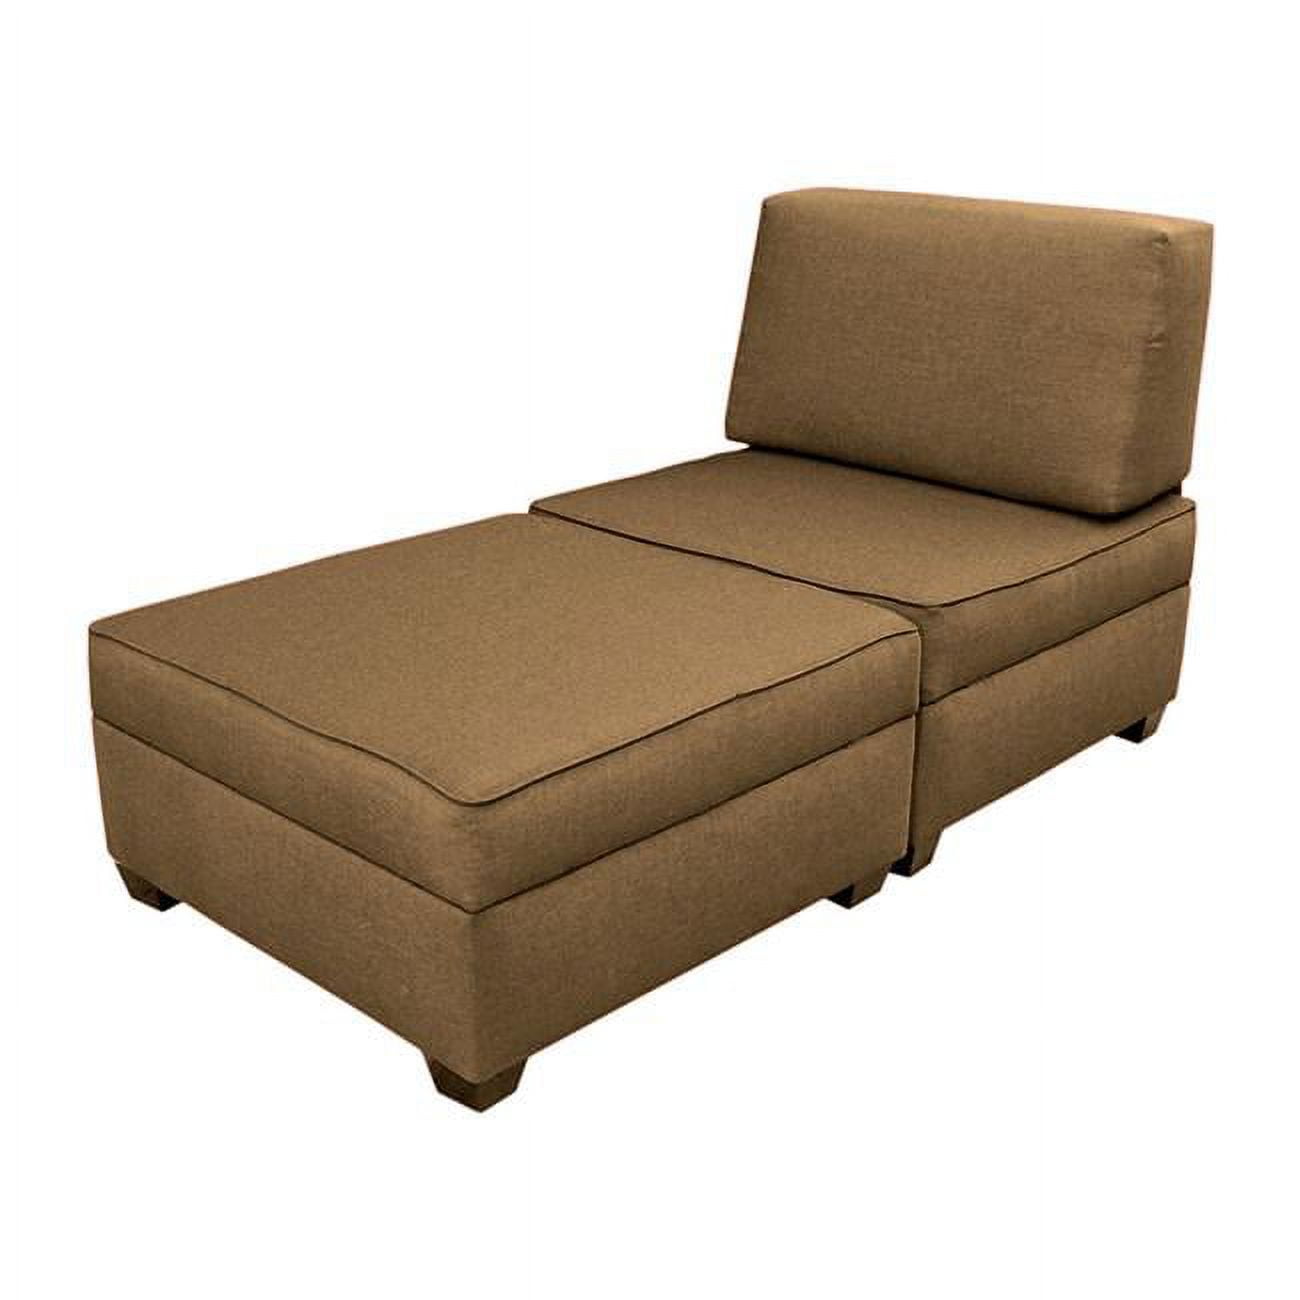 MFCL-BS 36 in. Chaise Lounge Plus 1 Storage Ottomans - Mocha -  Duobed